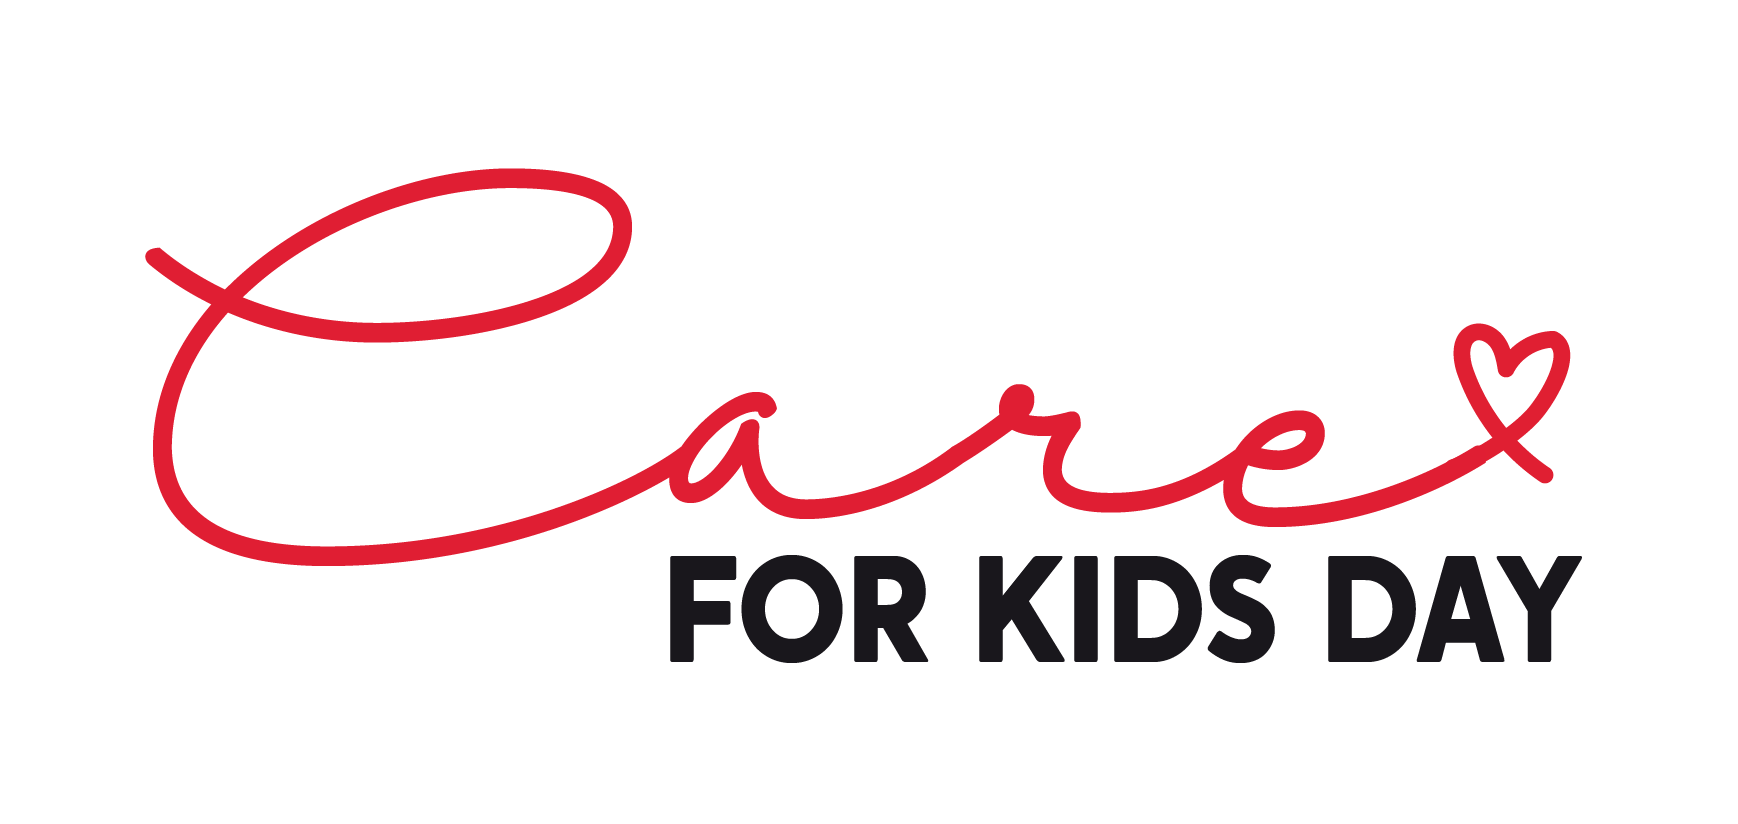 Care For Kids Day